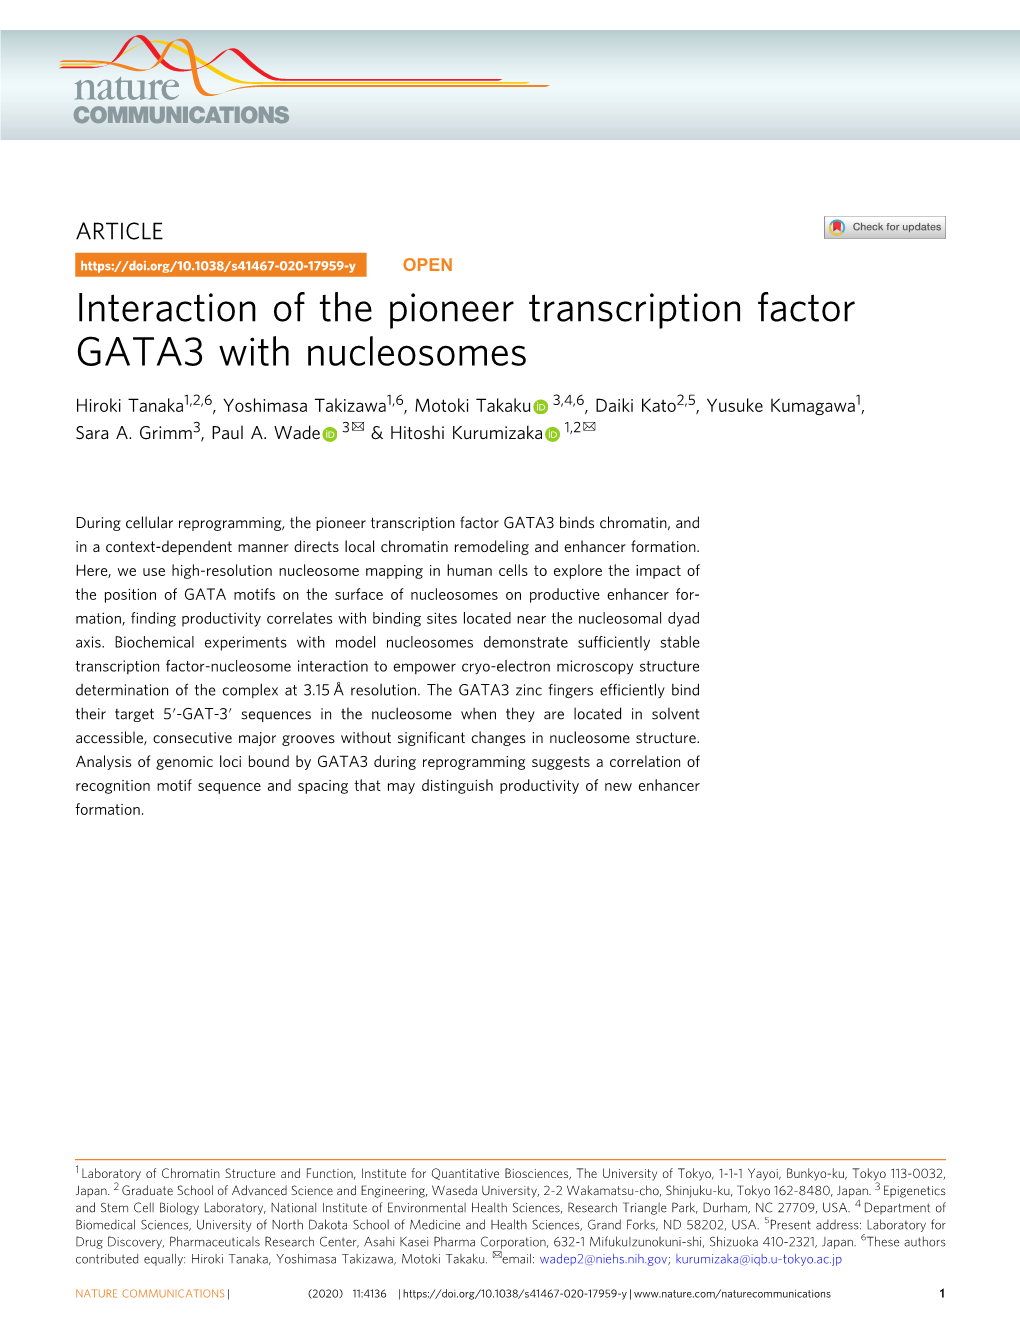 Interaction of the Pioneer Transcription Factor GATA3 with Nucleosomes